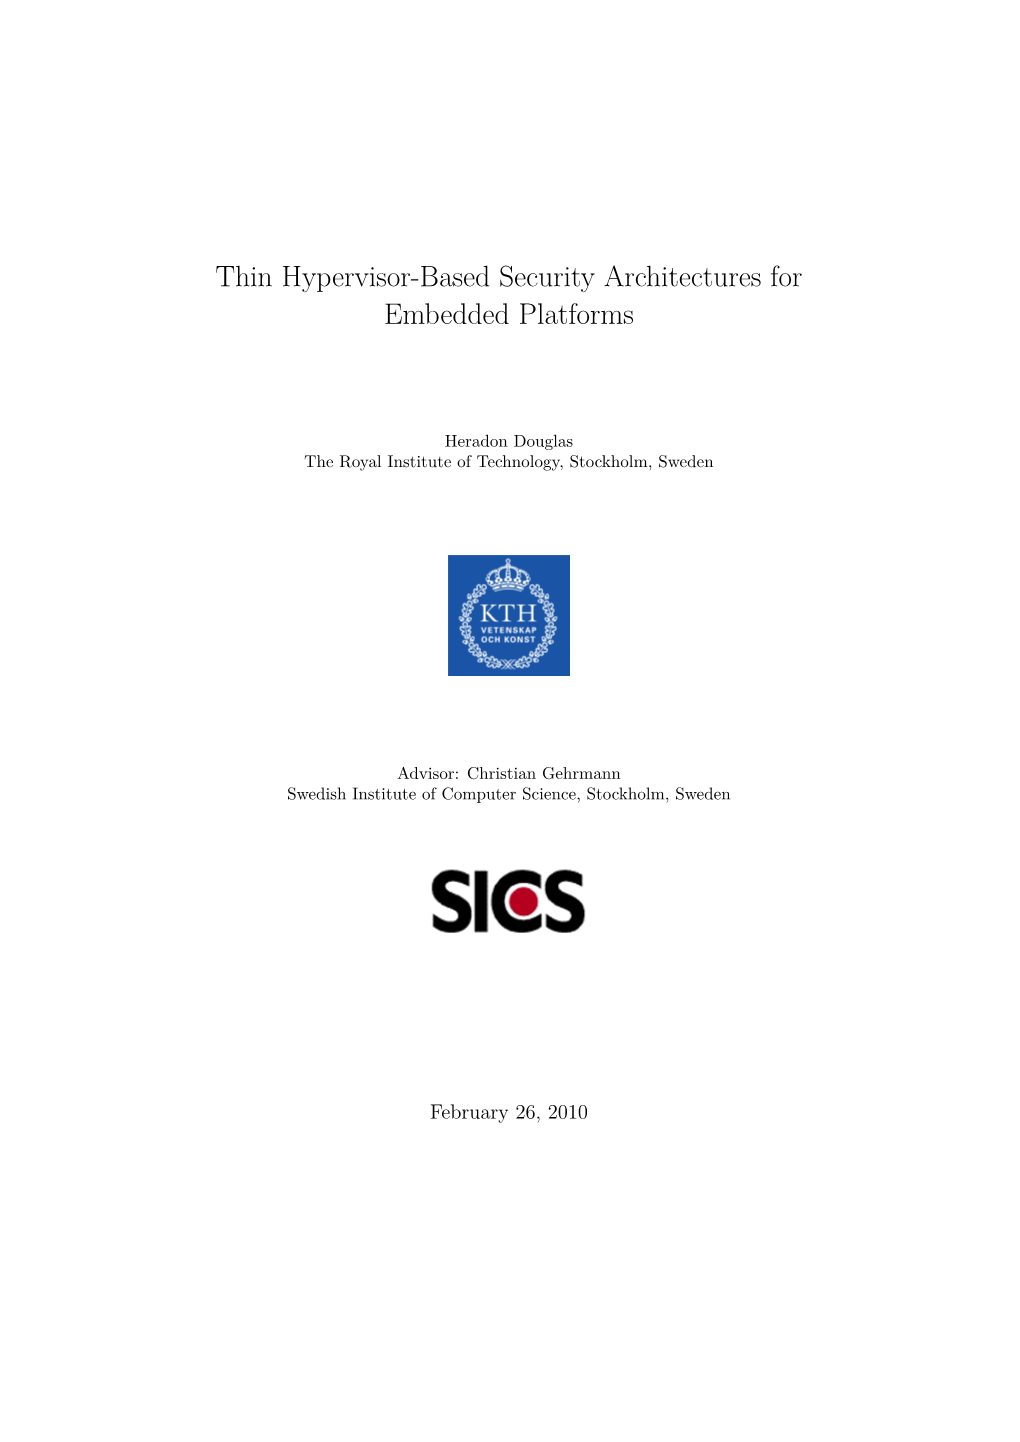 Thin Hypervisor-Based Security Architectures for Embedded Platforms